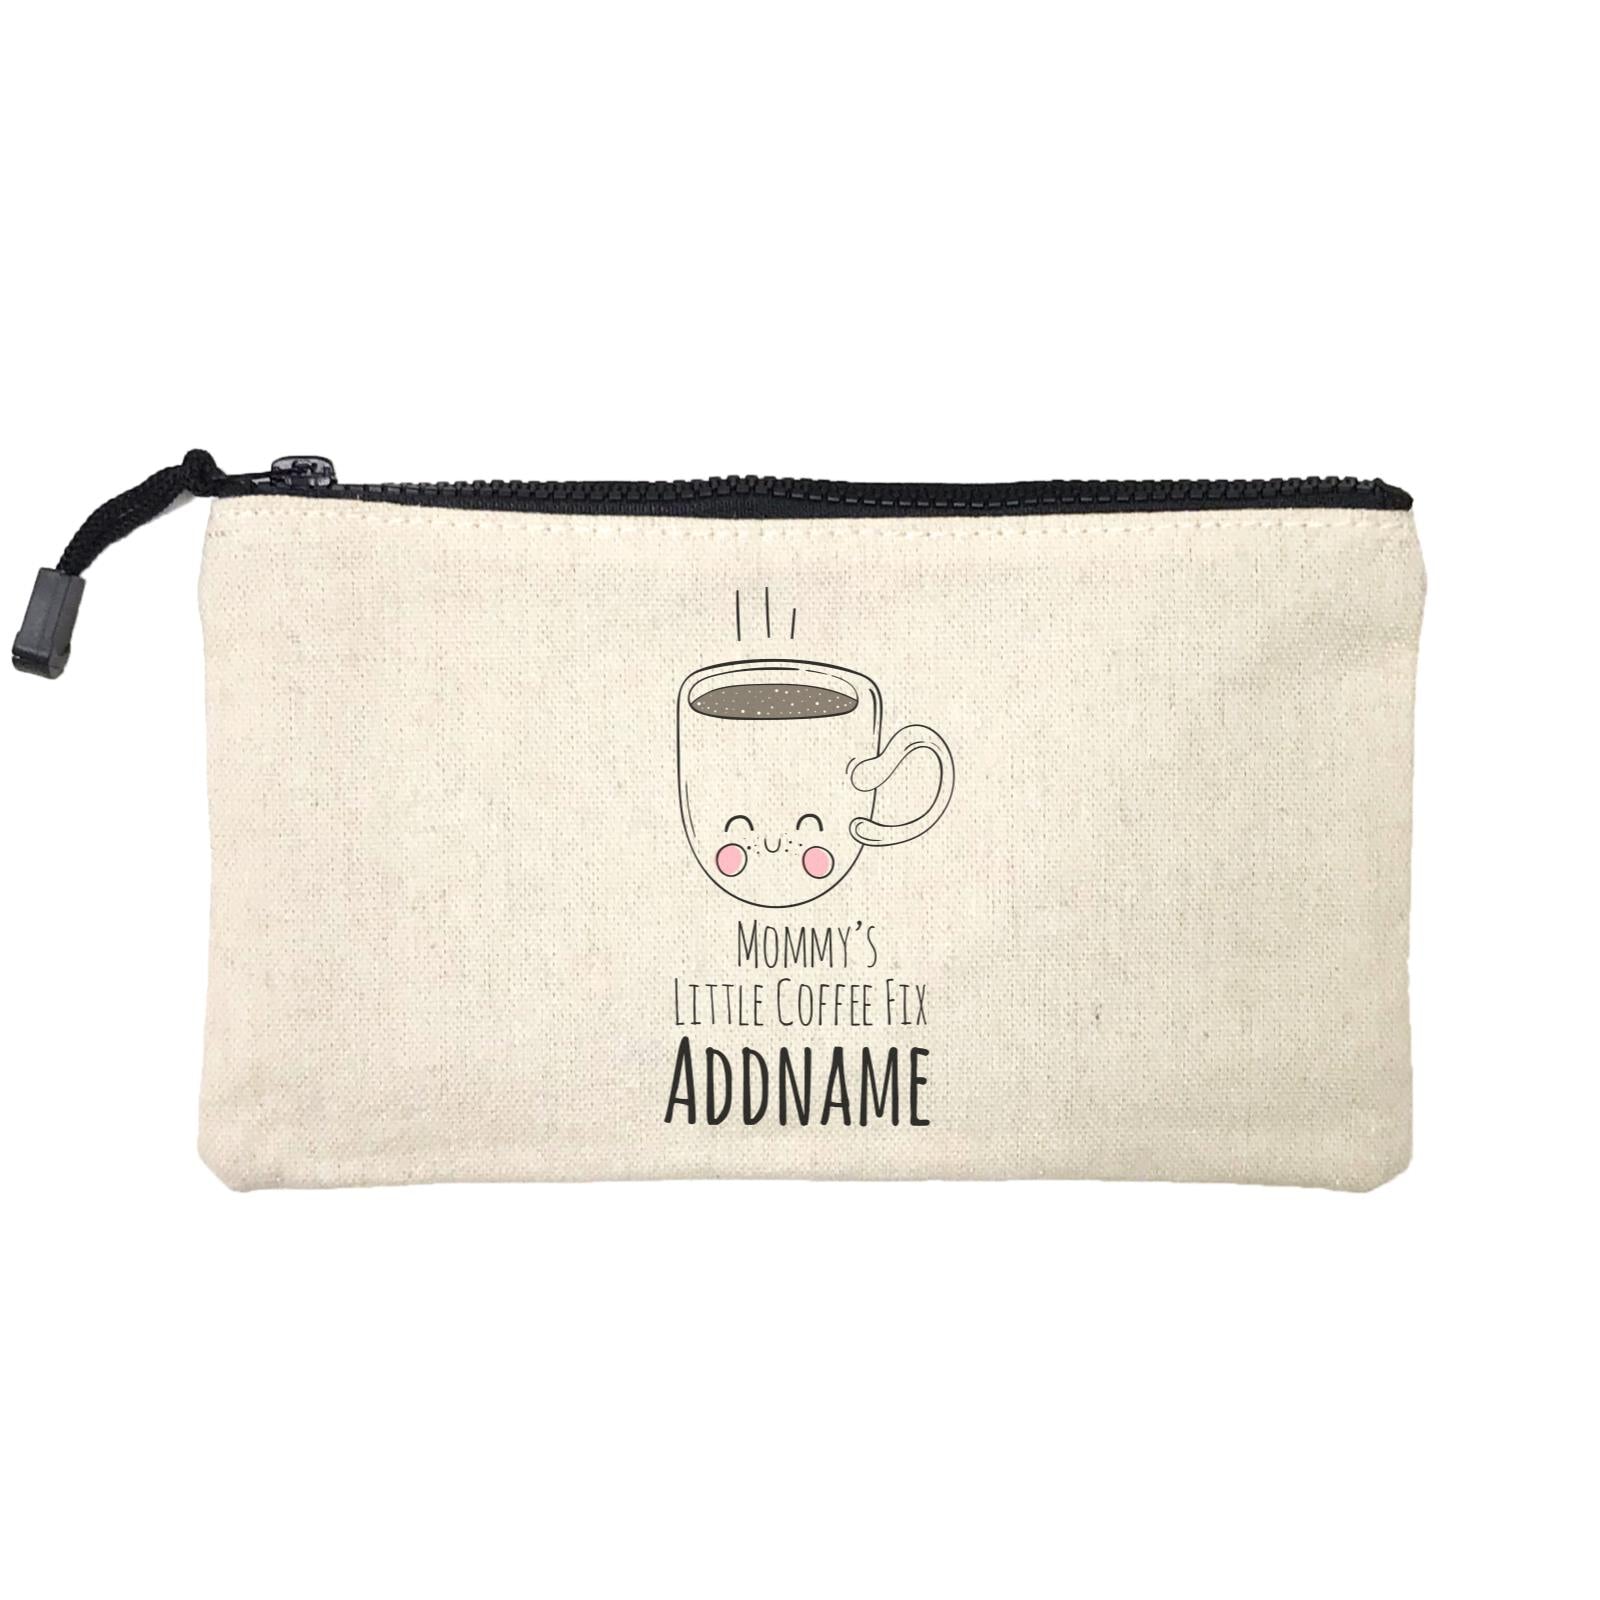 Drawn Sweet Snacks Mommy's Little Coffee Addname Mini Accessories Stationery Pouch